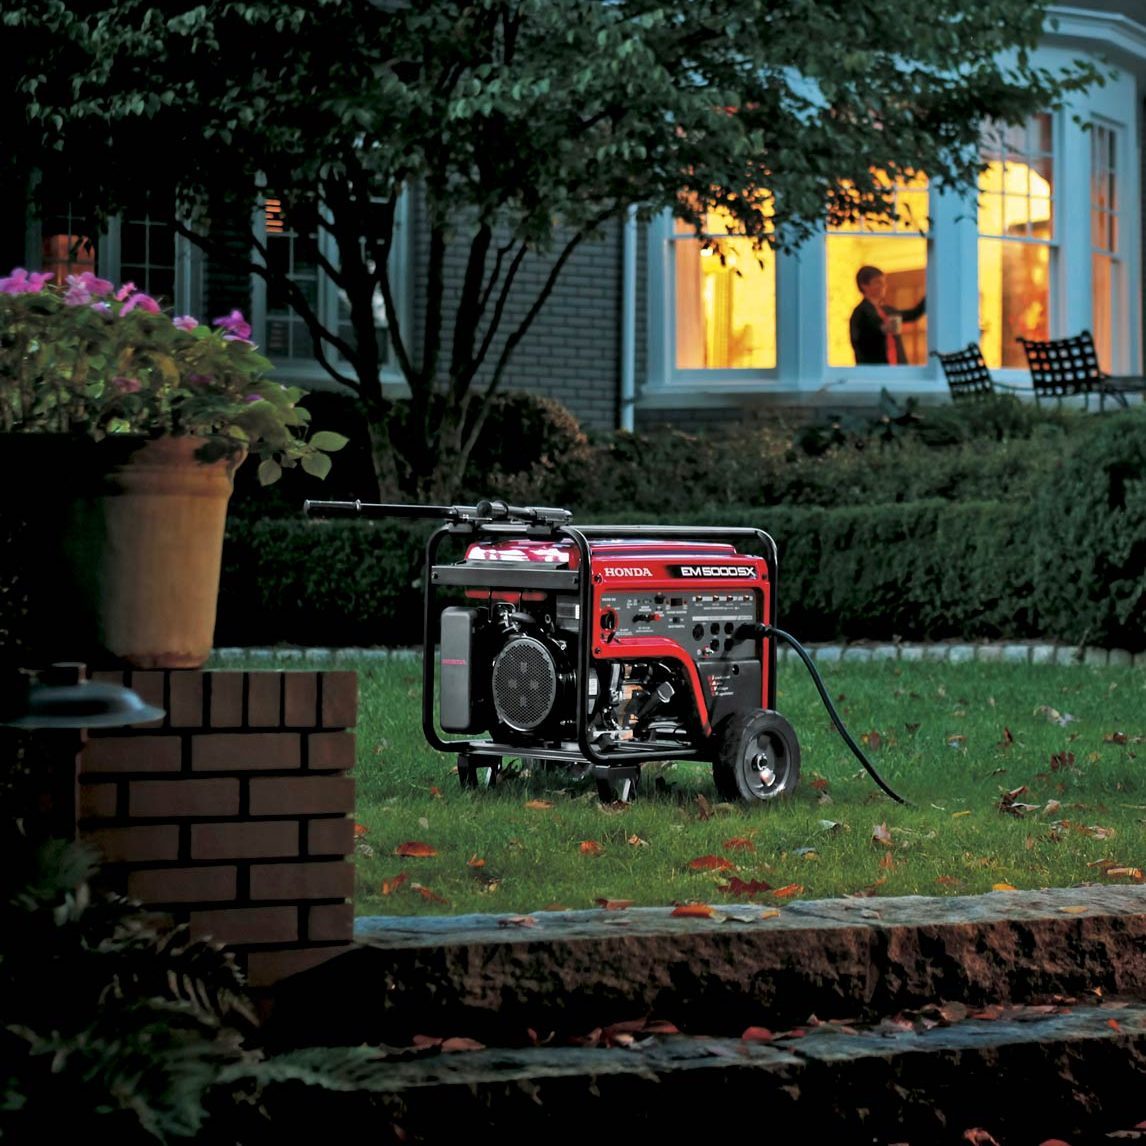 A portable generator is placed on a lawn in the foreground, with a large house in the background displaying illuminated windows. Inside the house, two people are visible through the windows, possibly engaged in conversation. The scene is set during the evening.